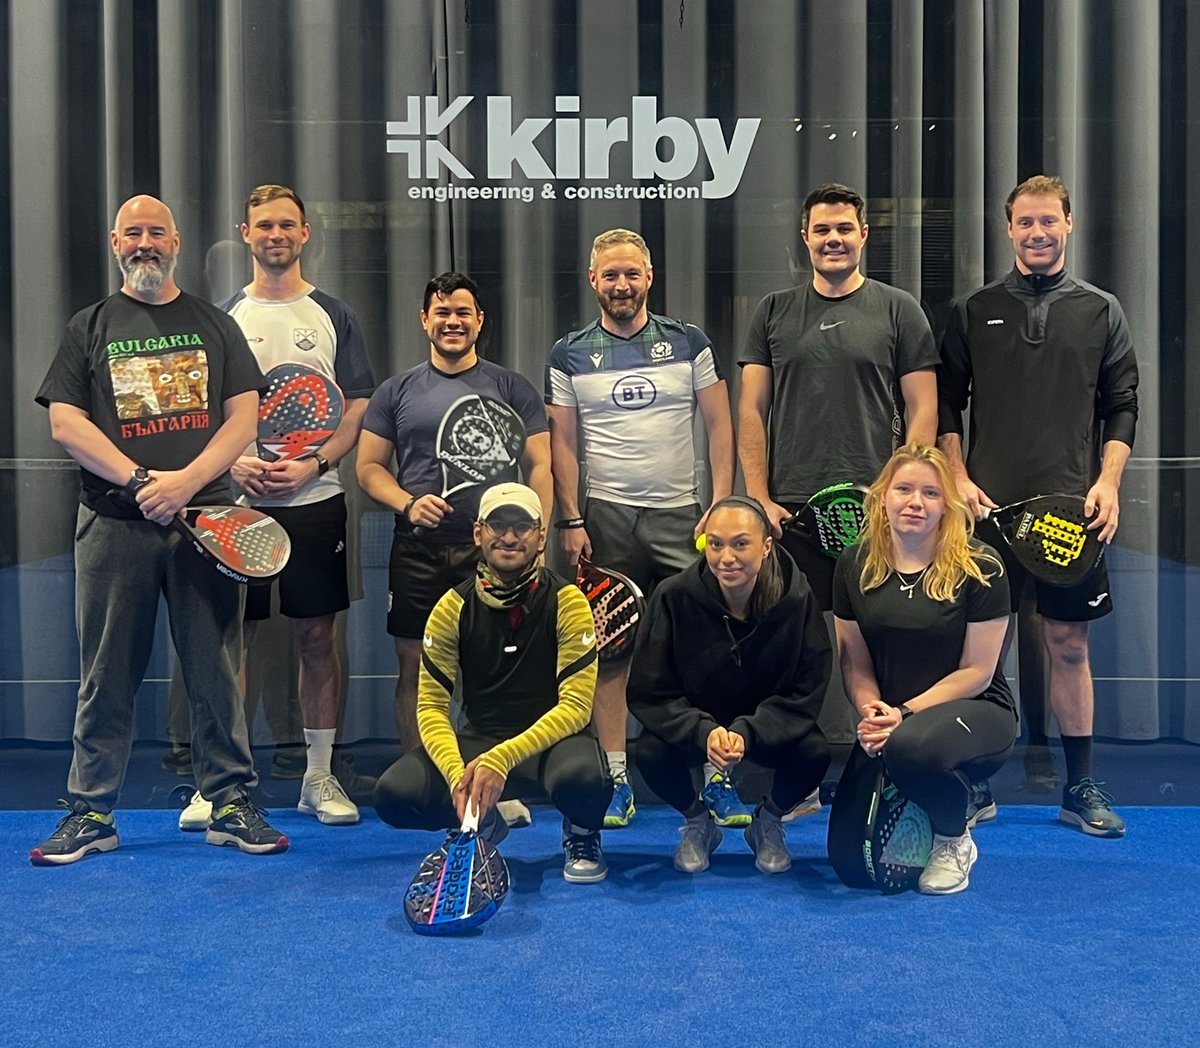 Kirby has partnered with Premium Padel, a local community club located in Gävle, Sweden!

The Padel club offers the Kirby team an environment to participate in healthy activities and gentle competition!

#PeopleFirst #KirbyCoreValues #csr #localcommunity #Gävle